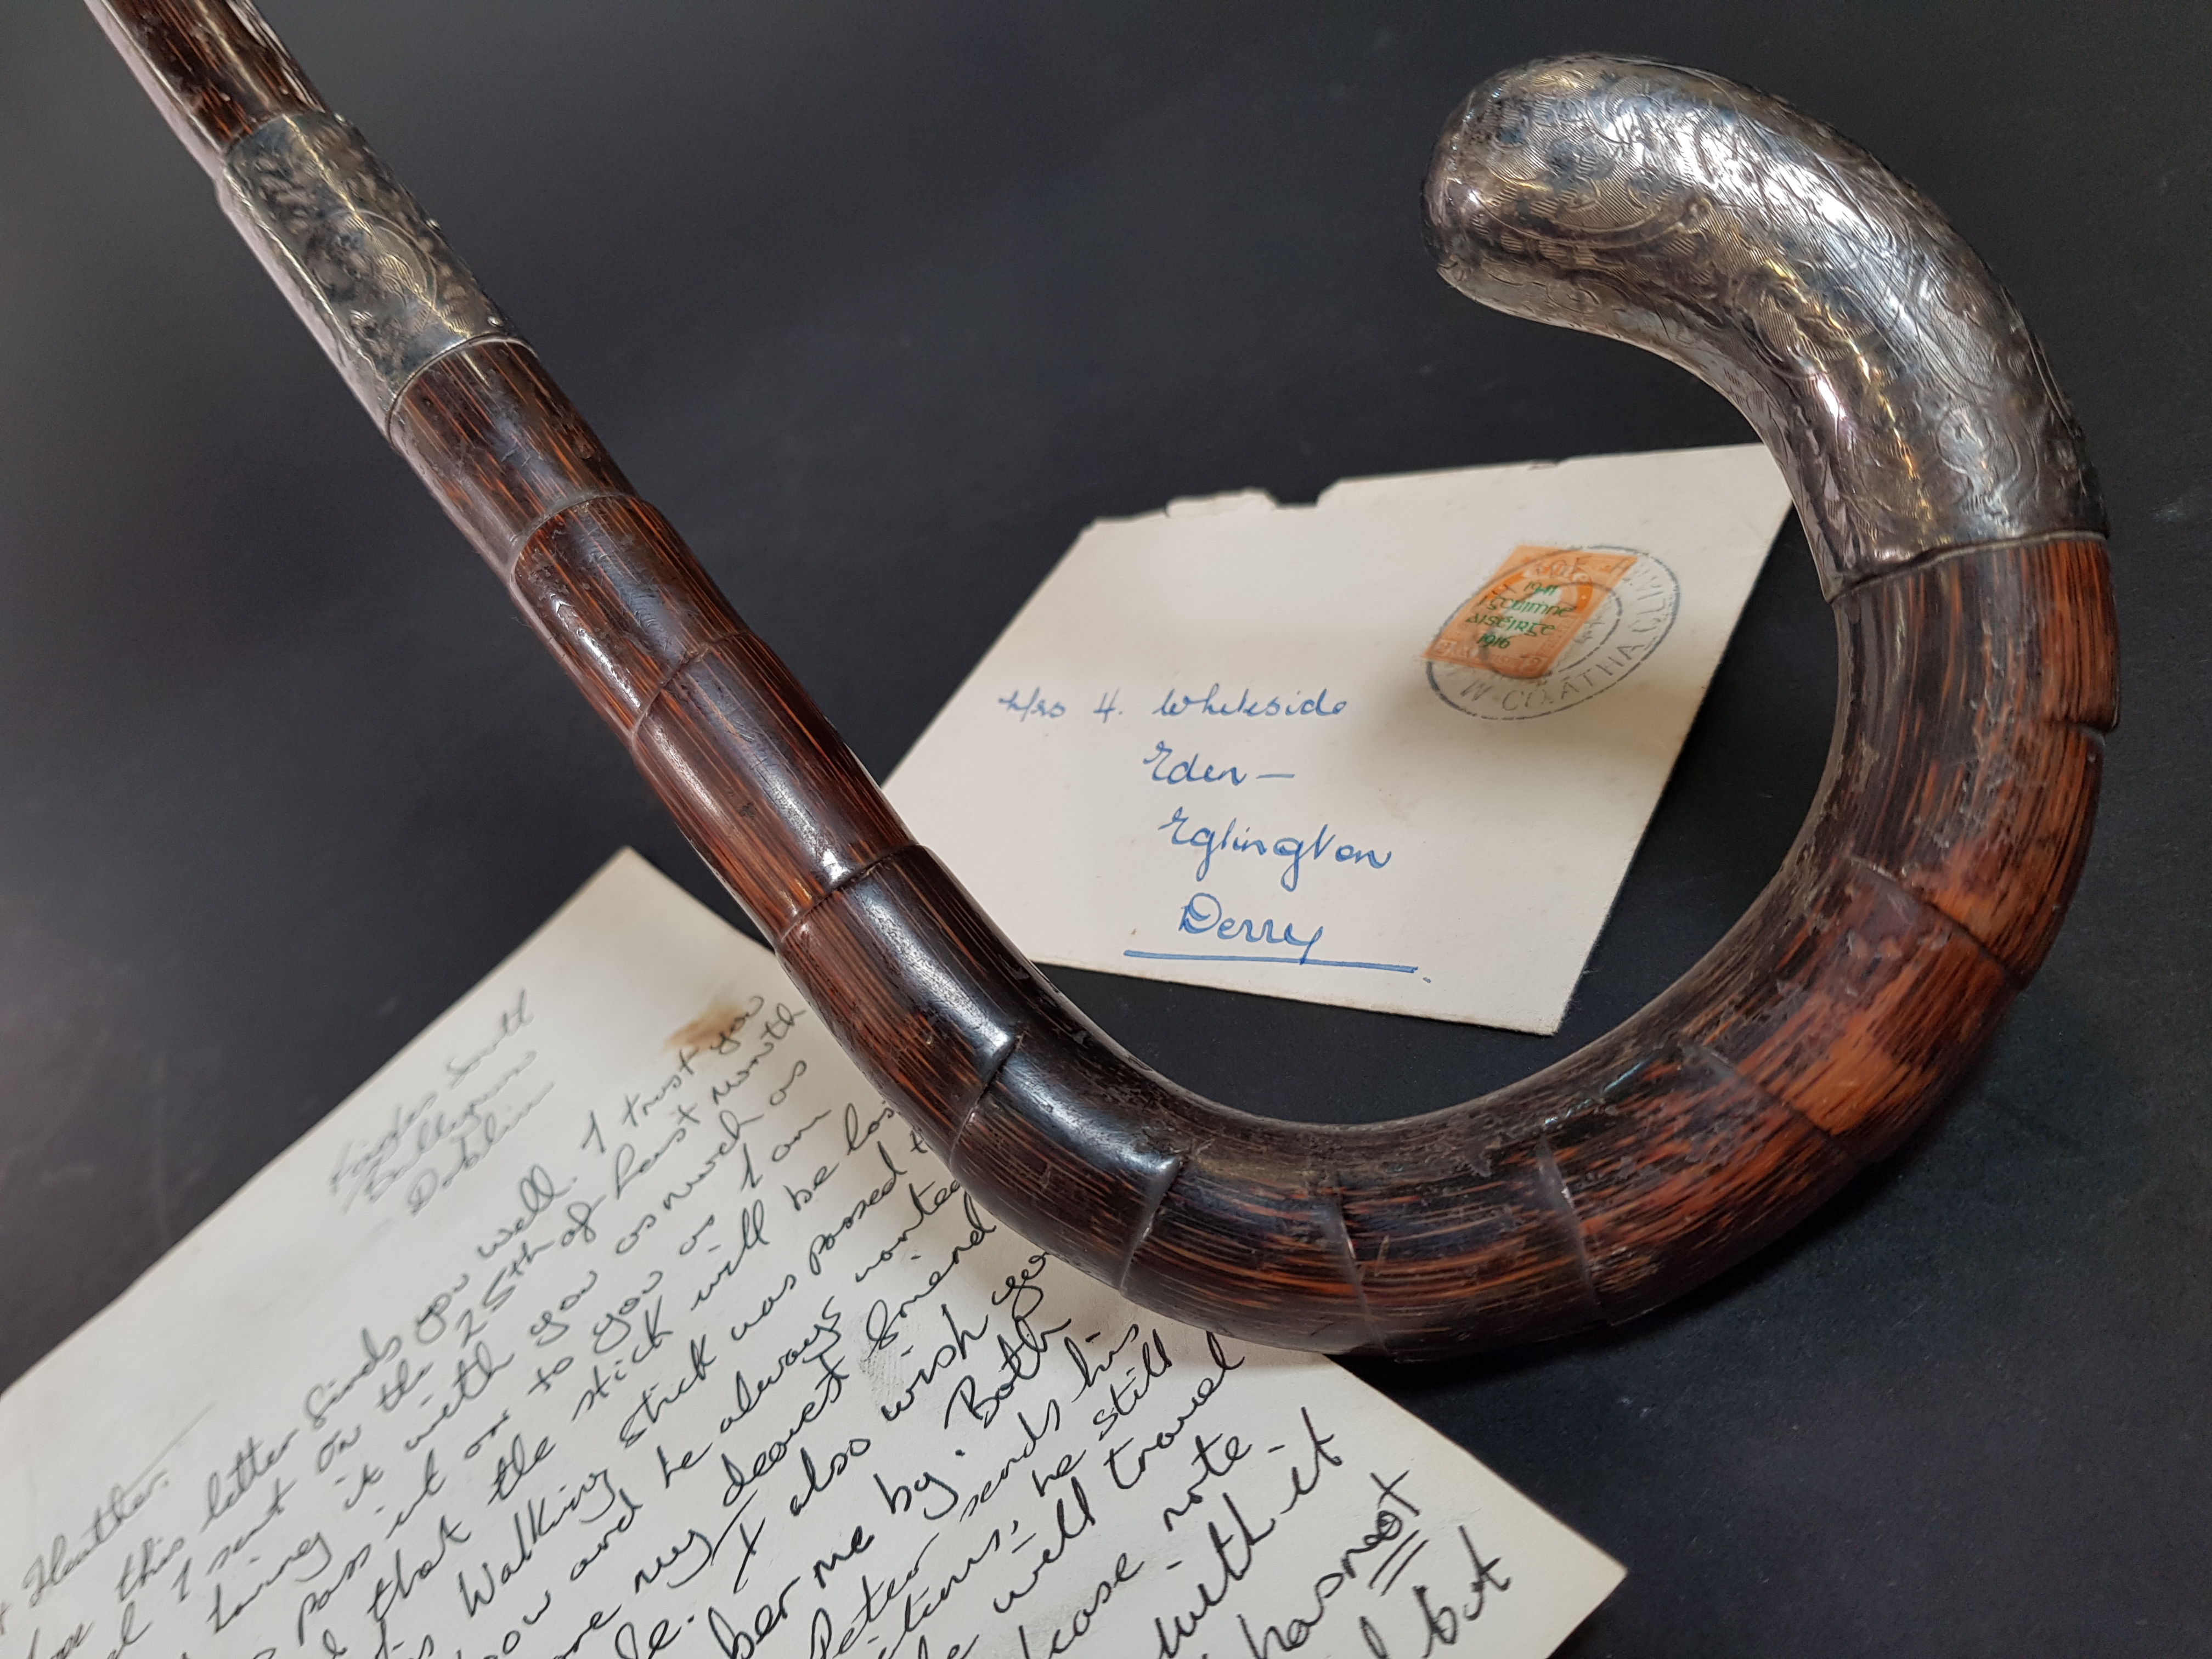 AN IMPORTANT SILVER MOUNTED WALKING CANE PREVIOUSLY BELONGING TO MICHAEL COLLINS